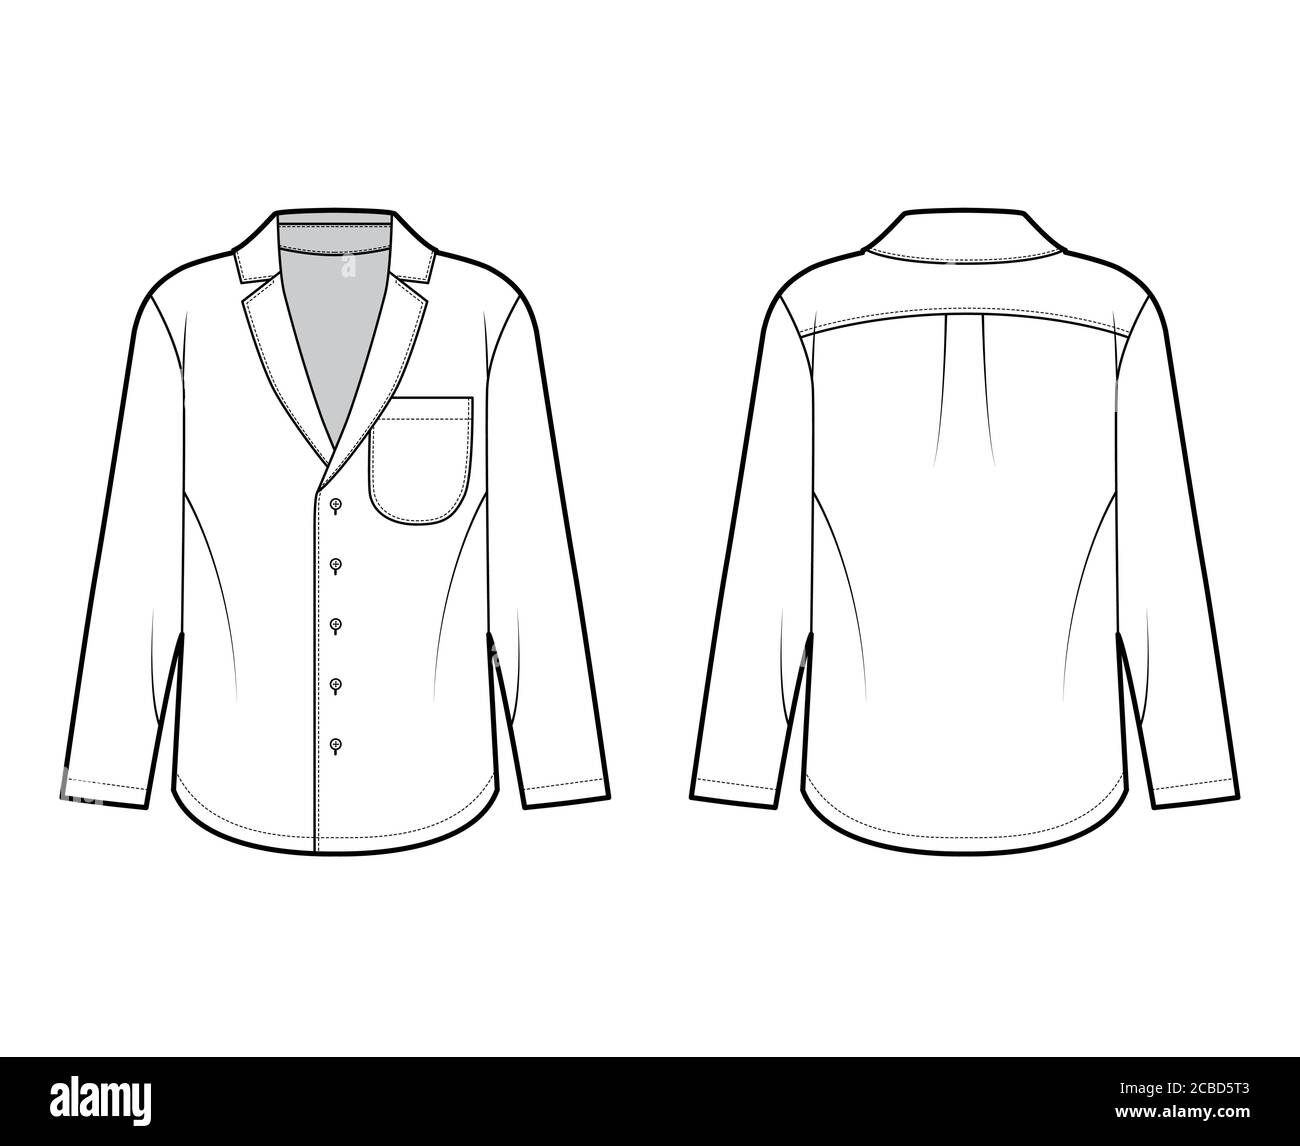 Shirt technical fashion illustration with loose silhouette